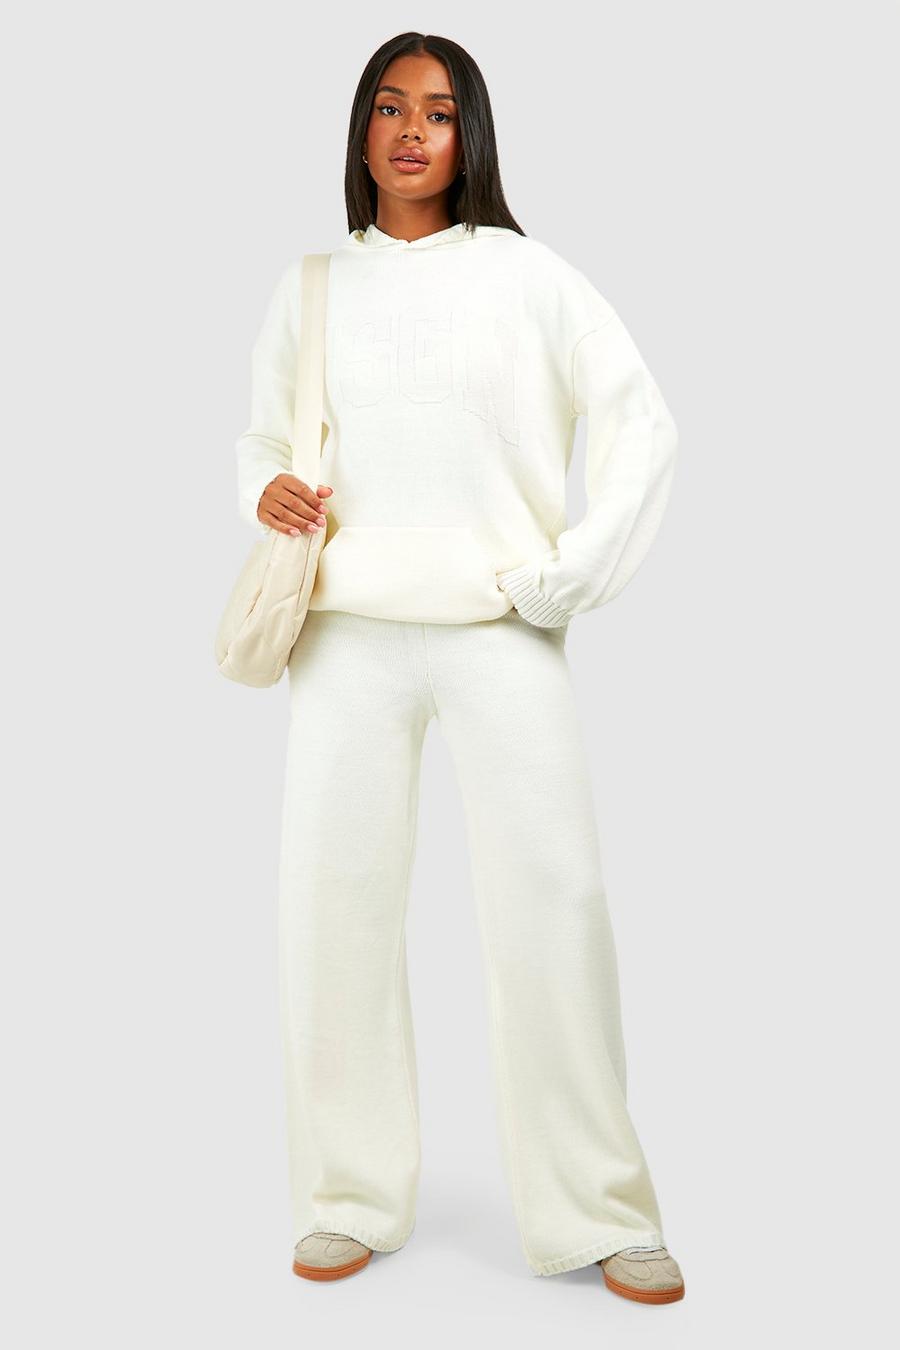 Winter Knit Sport Sweater and Jogger Set Outfits Warm Turtleneck